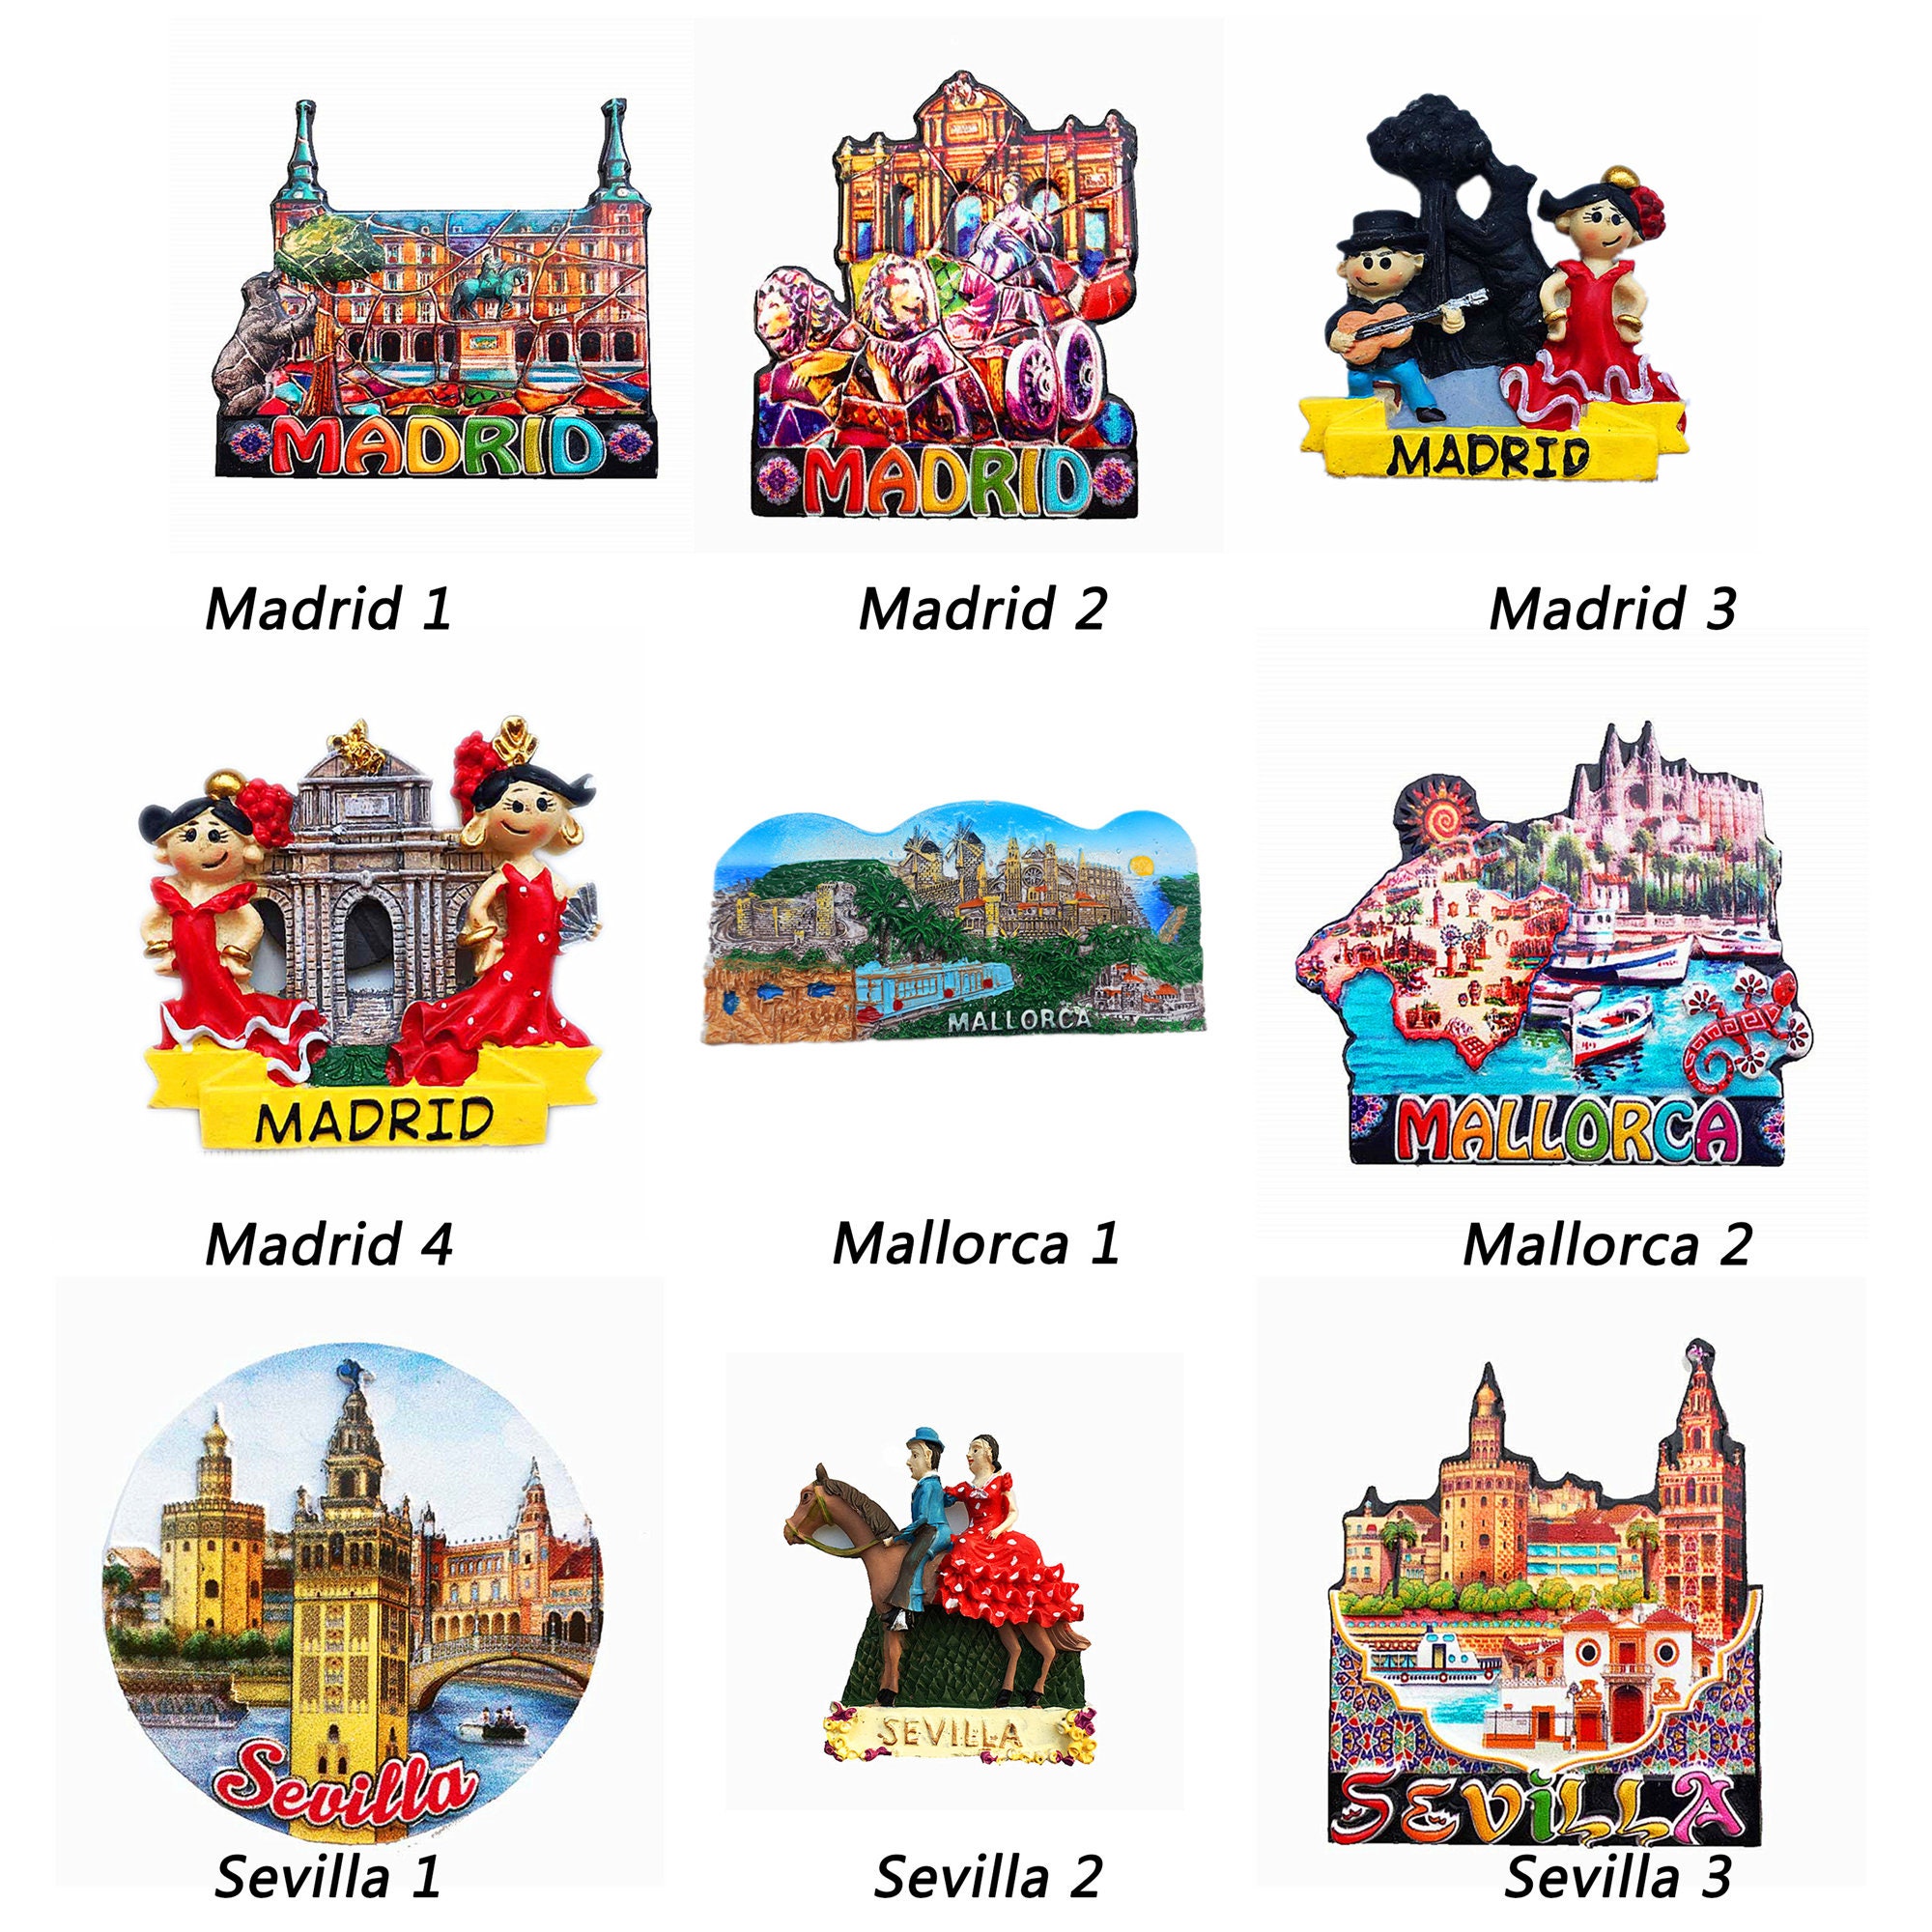 Sale of Tourist Souvenirs in Seville Editorial Photography - Image of  magnet, retail: 51885652